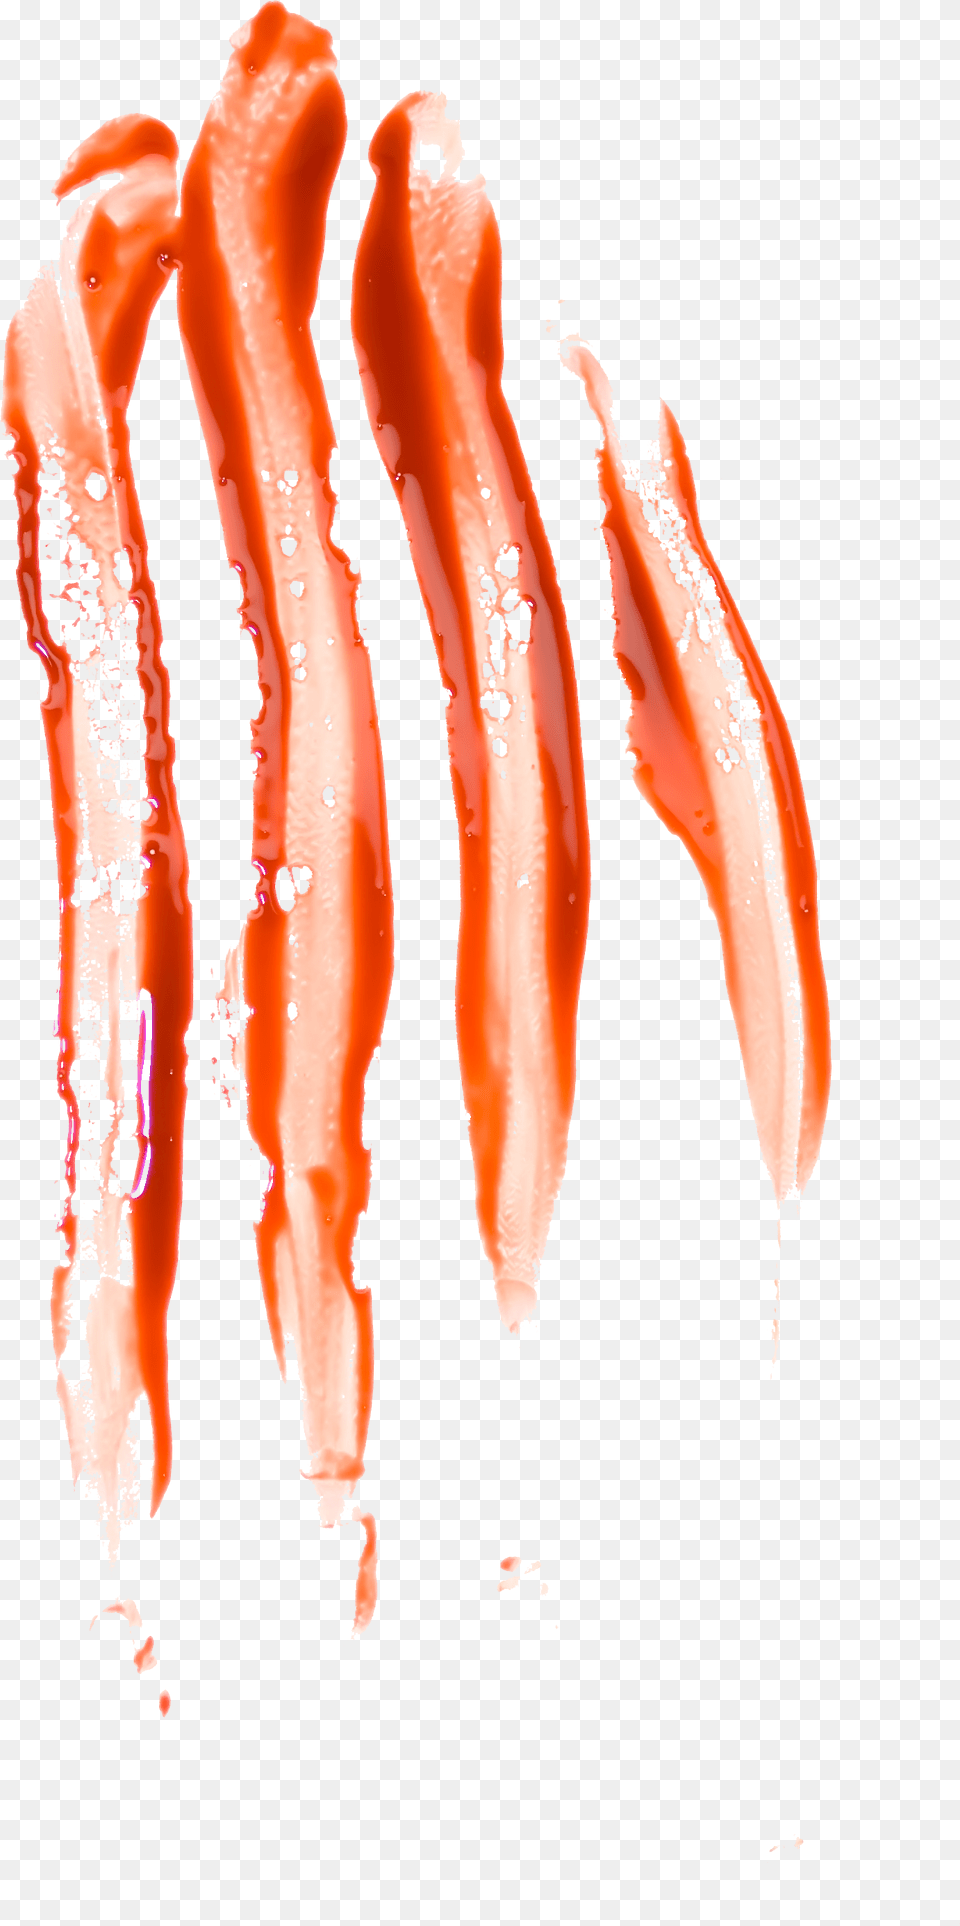 Blood, Carrot, Food, Plant, Produce Png Image